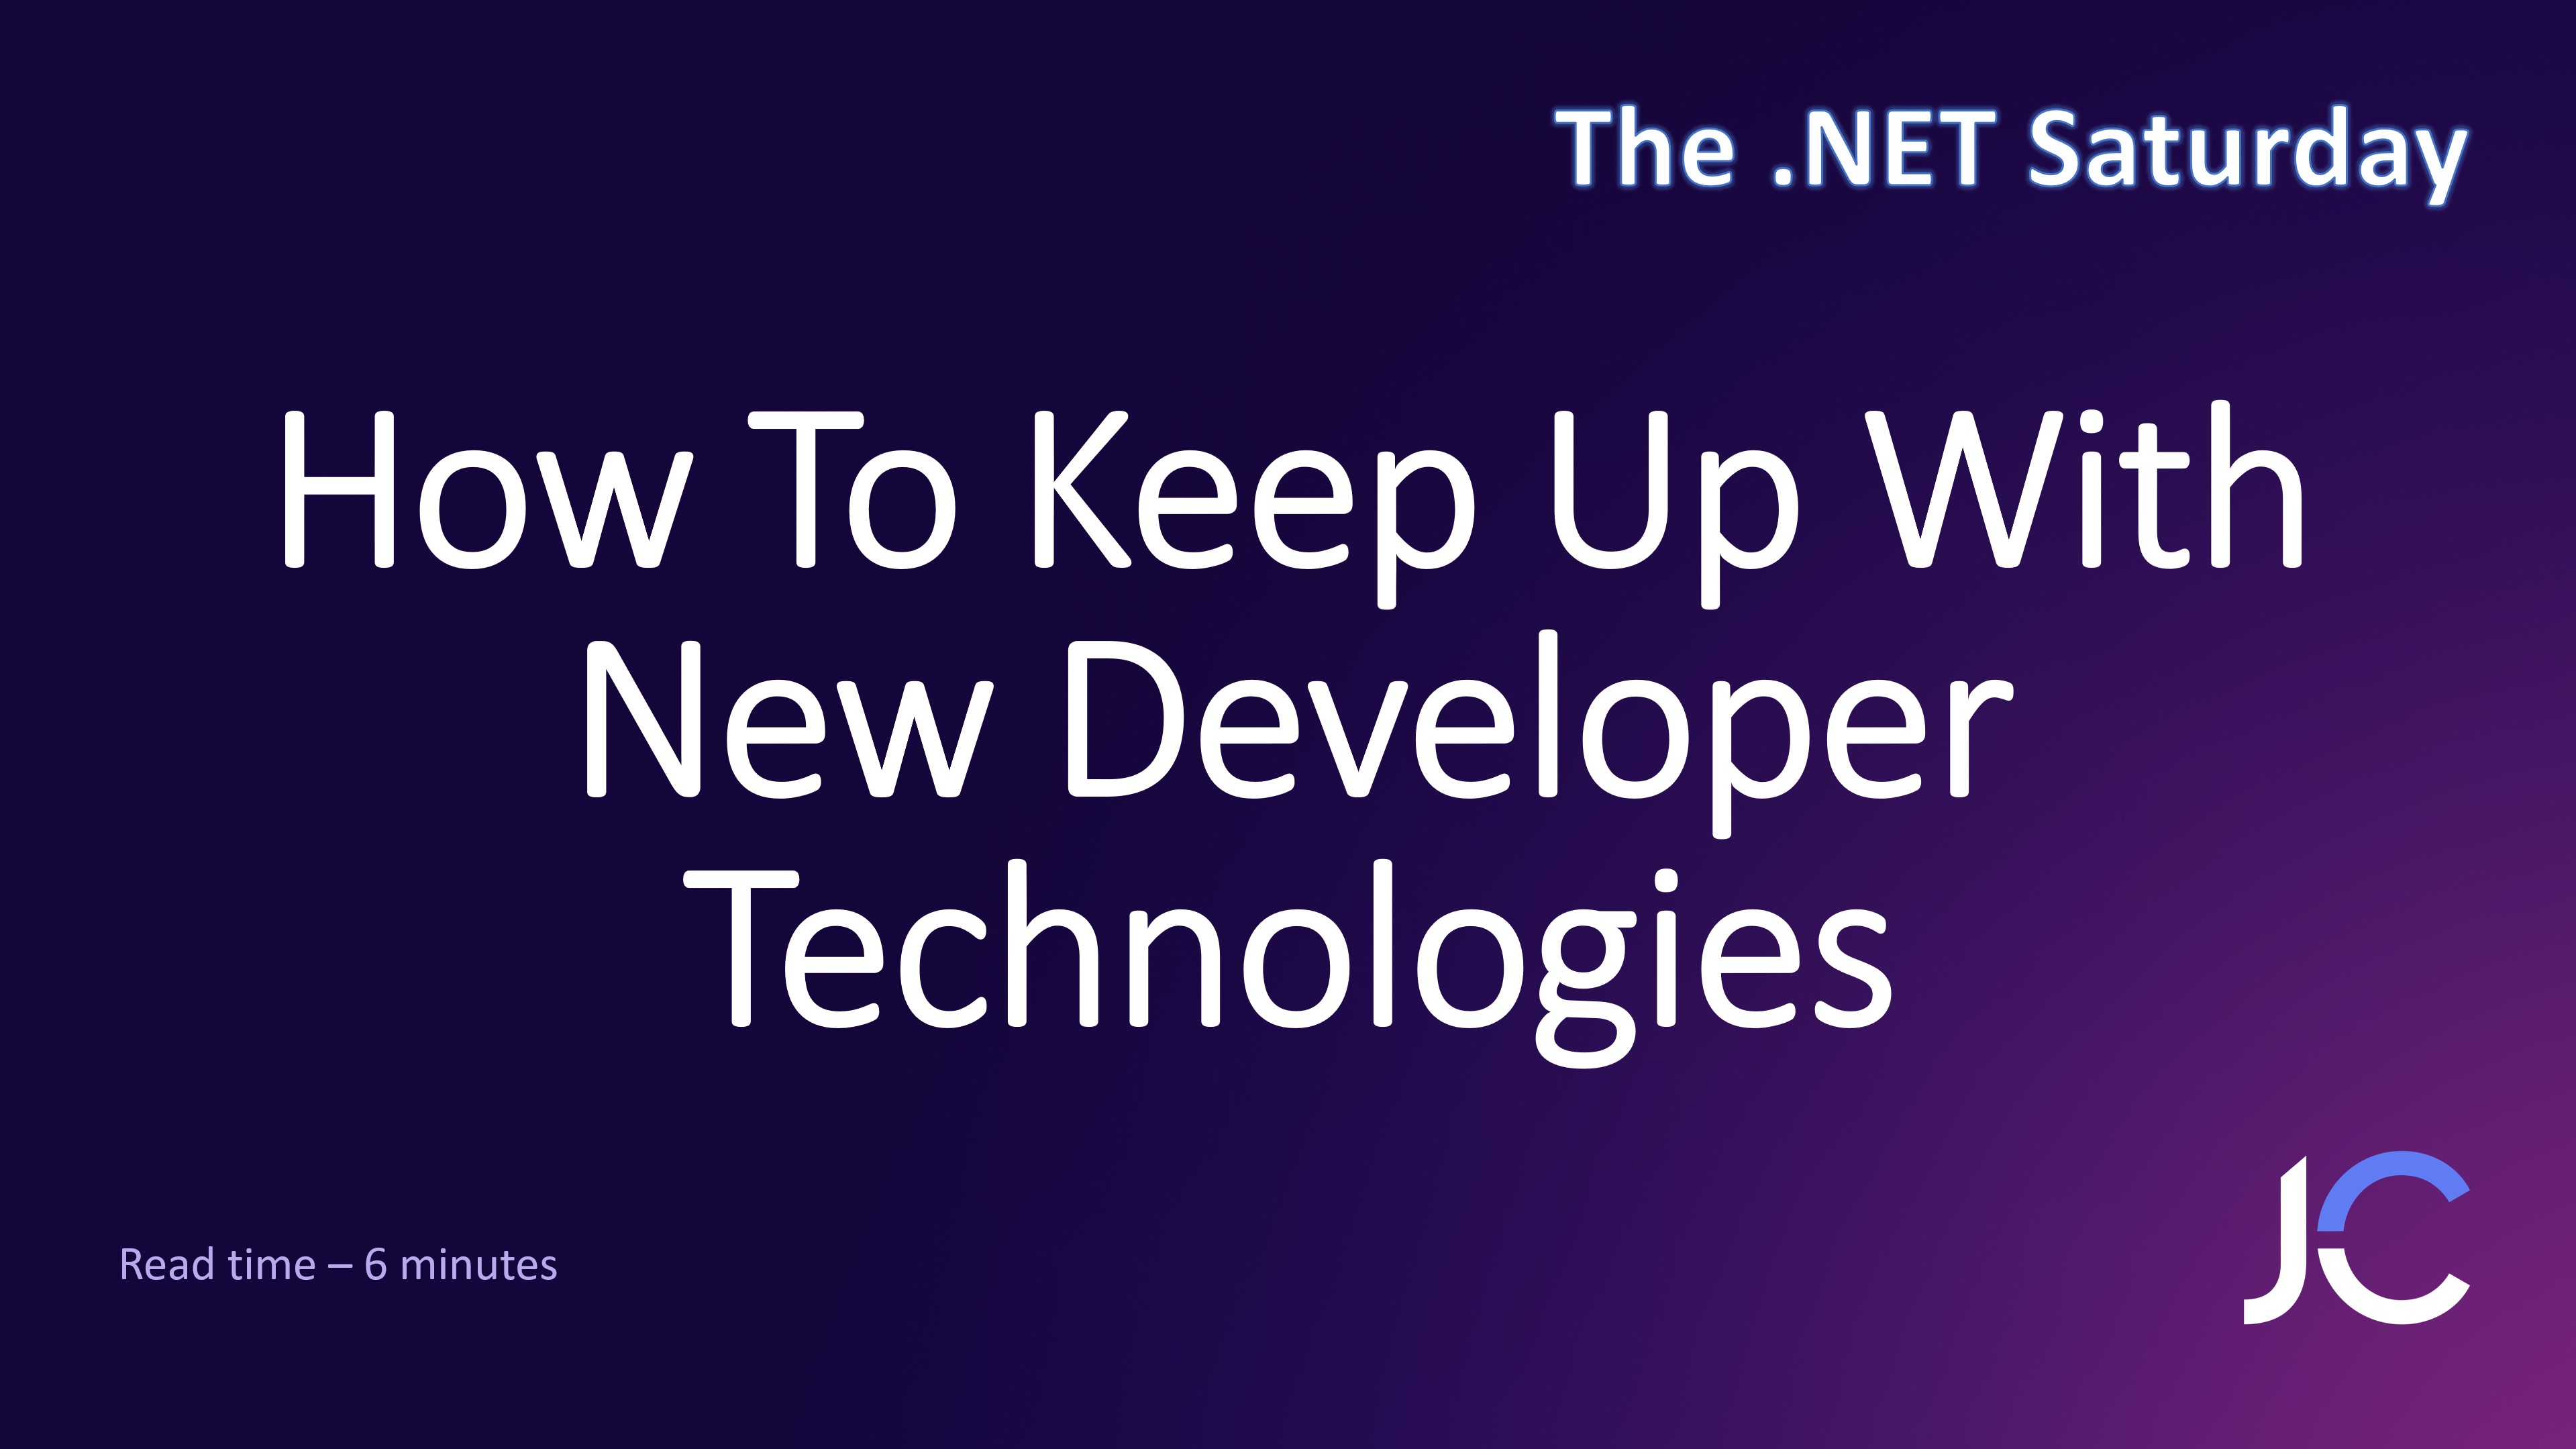 How To Keep Up With New Developer Technologies